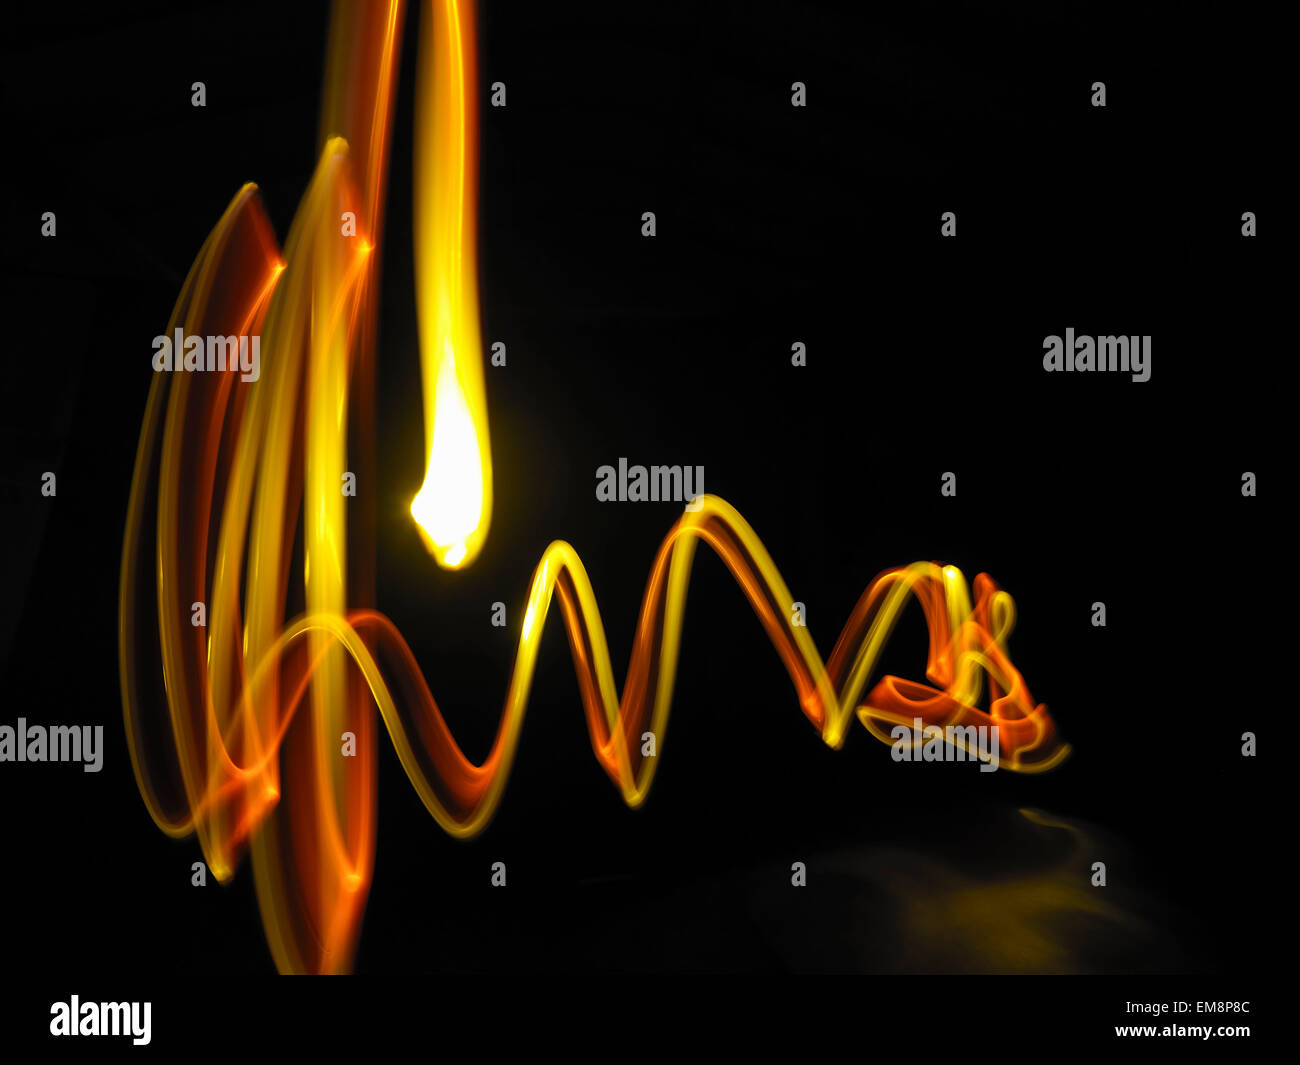 Abstract light trails made by molten metal against black background Stock Photo